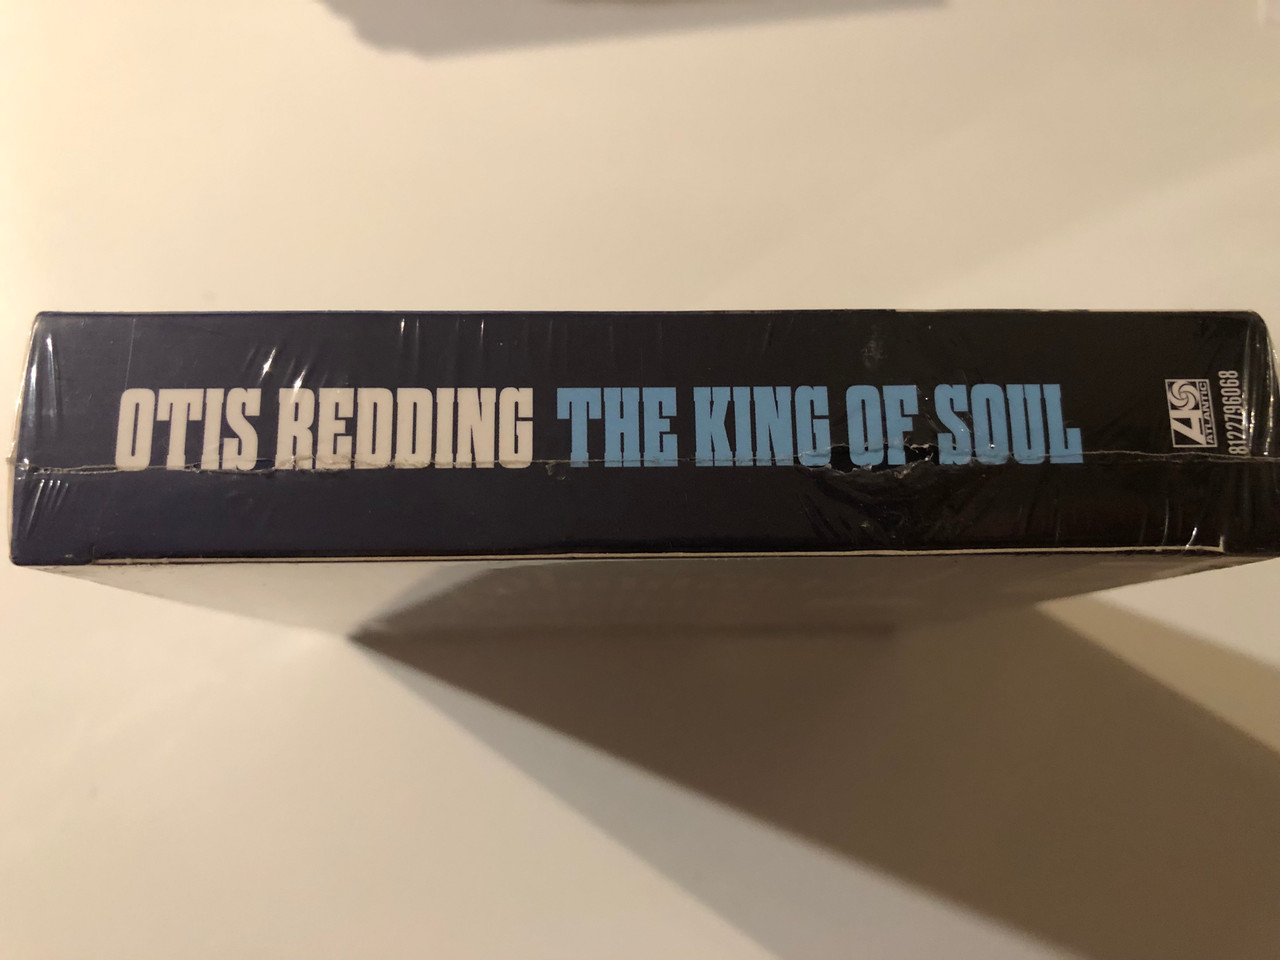 https://cdn10.bigcommerce.com/s-62bdpkt7pb/products/0/images/276188/Otis_Redding_The_King_Of_Soul_50th_Anniversary_Of_The_King_Of_Soul_4-Discs_With_Over_90_Tracks_Of_Otis_Best_From_The_Studio_And_The_Stage._Includes_Sittin_On_The_Dock_Of_The_Bay_3__84524.1686243118.1280.1280.JPG?c=2&_gl=1*imys6c*_ga*MjA2NTIxMjE2MC4xNTkwNTEyNTMy*_ga_WS2VZYPC6G*MTY4NjIzOTQ0OS45MzMuMS4xNjg2MjQyODAzLjM0LjAuMA..